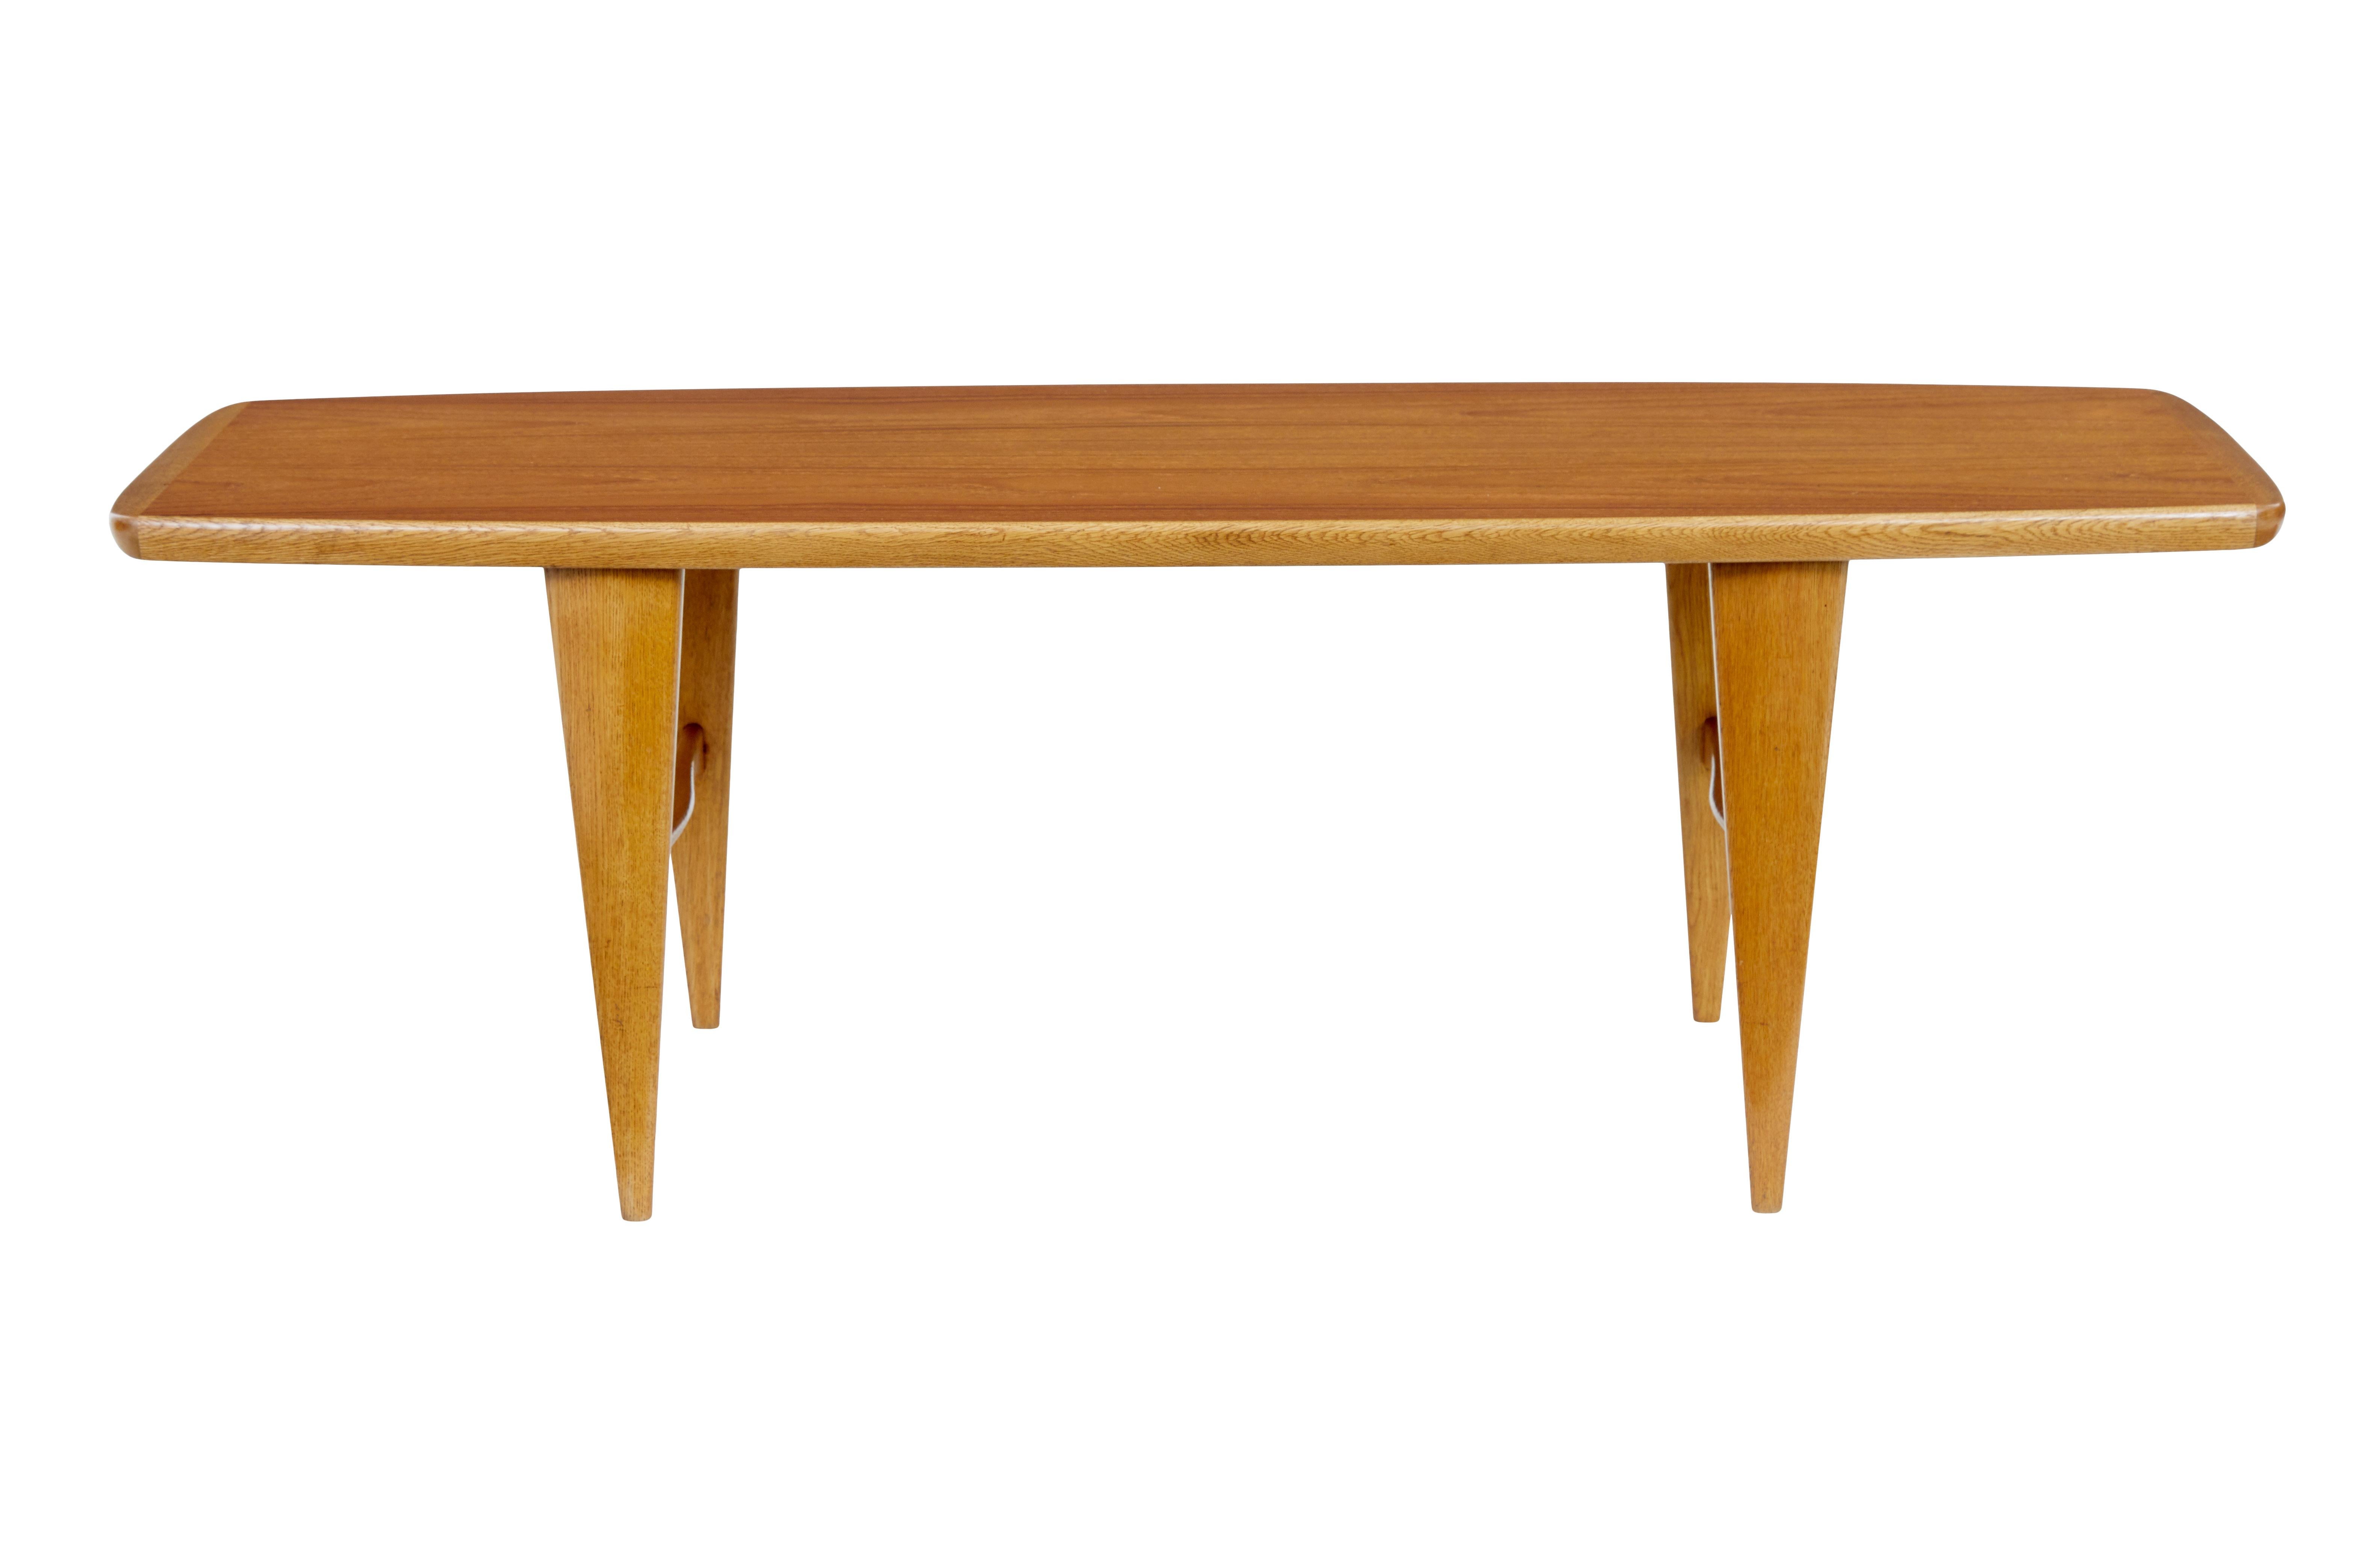 Mid 20th century Scandinavian teak coffee table circa 1960.

Stylish teak and oak shaped coffee table.  Teak top with oak border.  Standing on tapered oak legs united by a shaped h frame stretcher.

1 area of minor surface wear to top, couple of